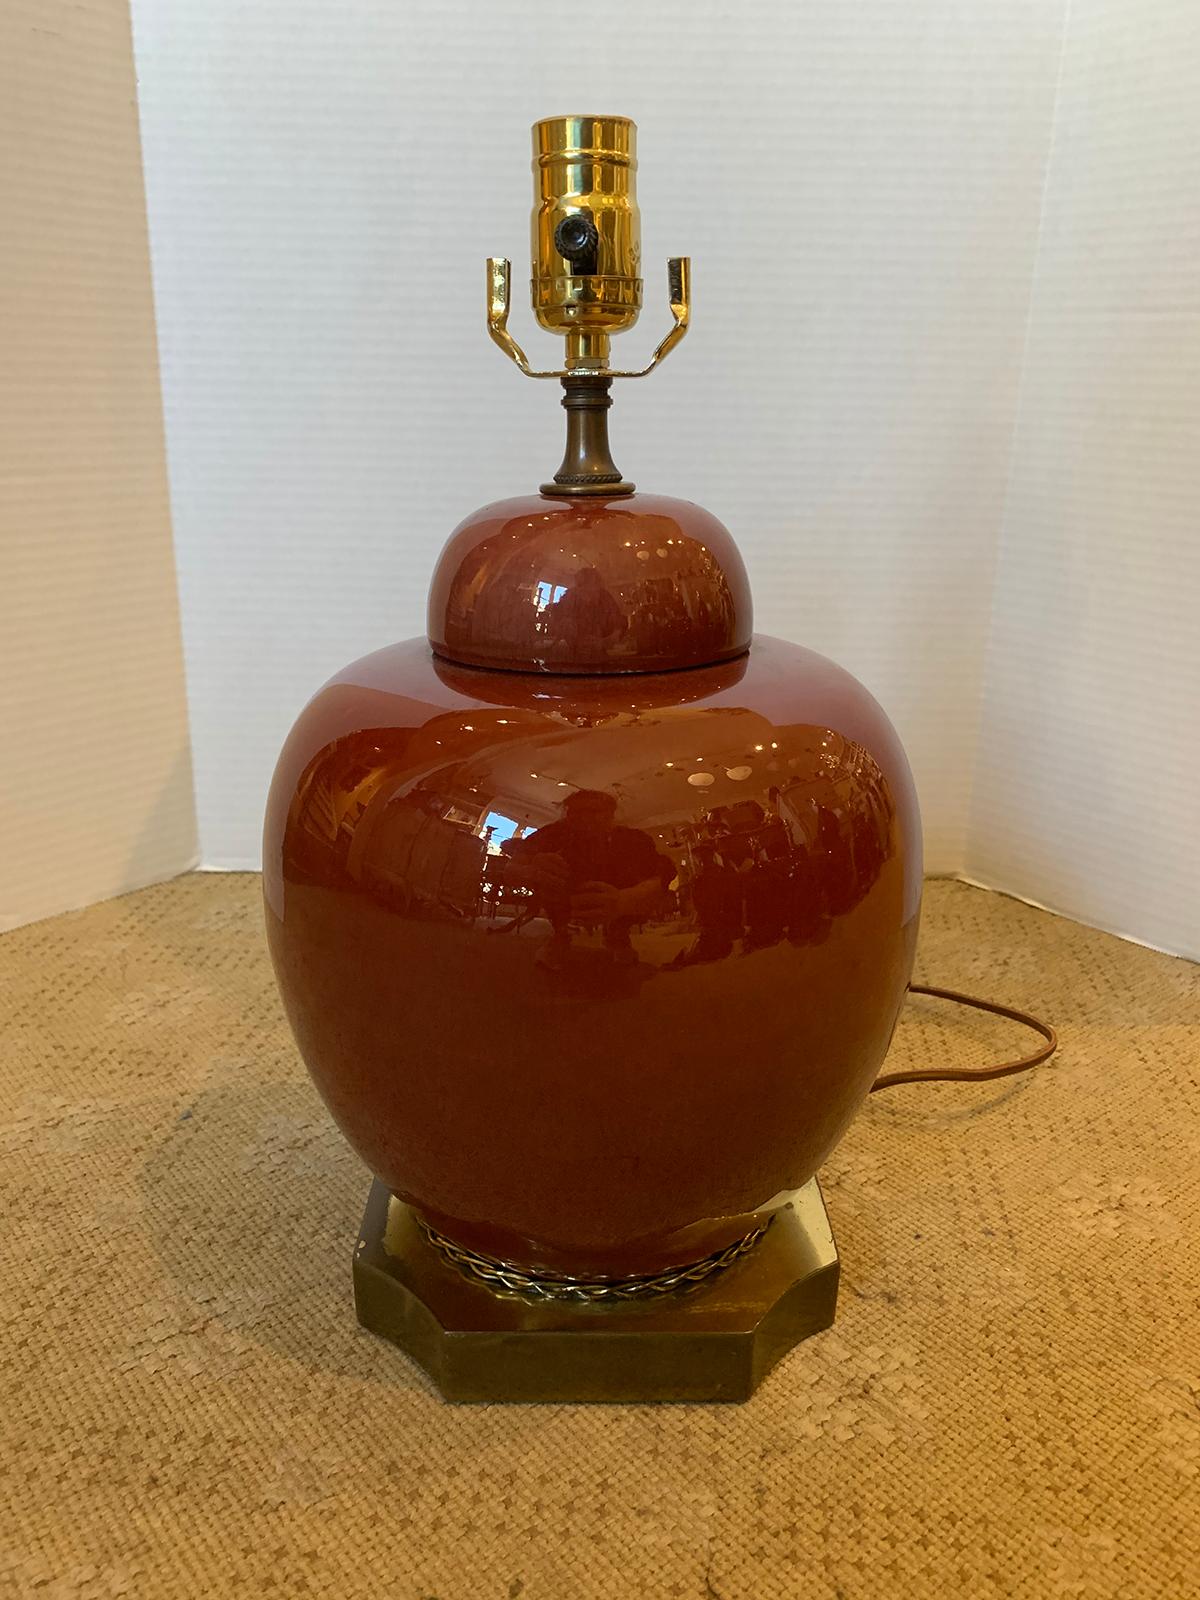 19th-20th century Chinese Sang de Boeuf oxblood ginger jar as lamp
New wiring.